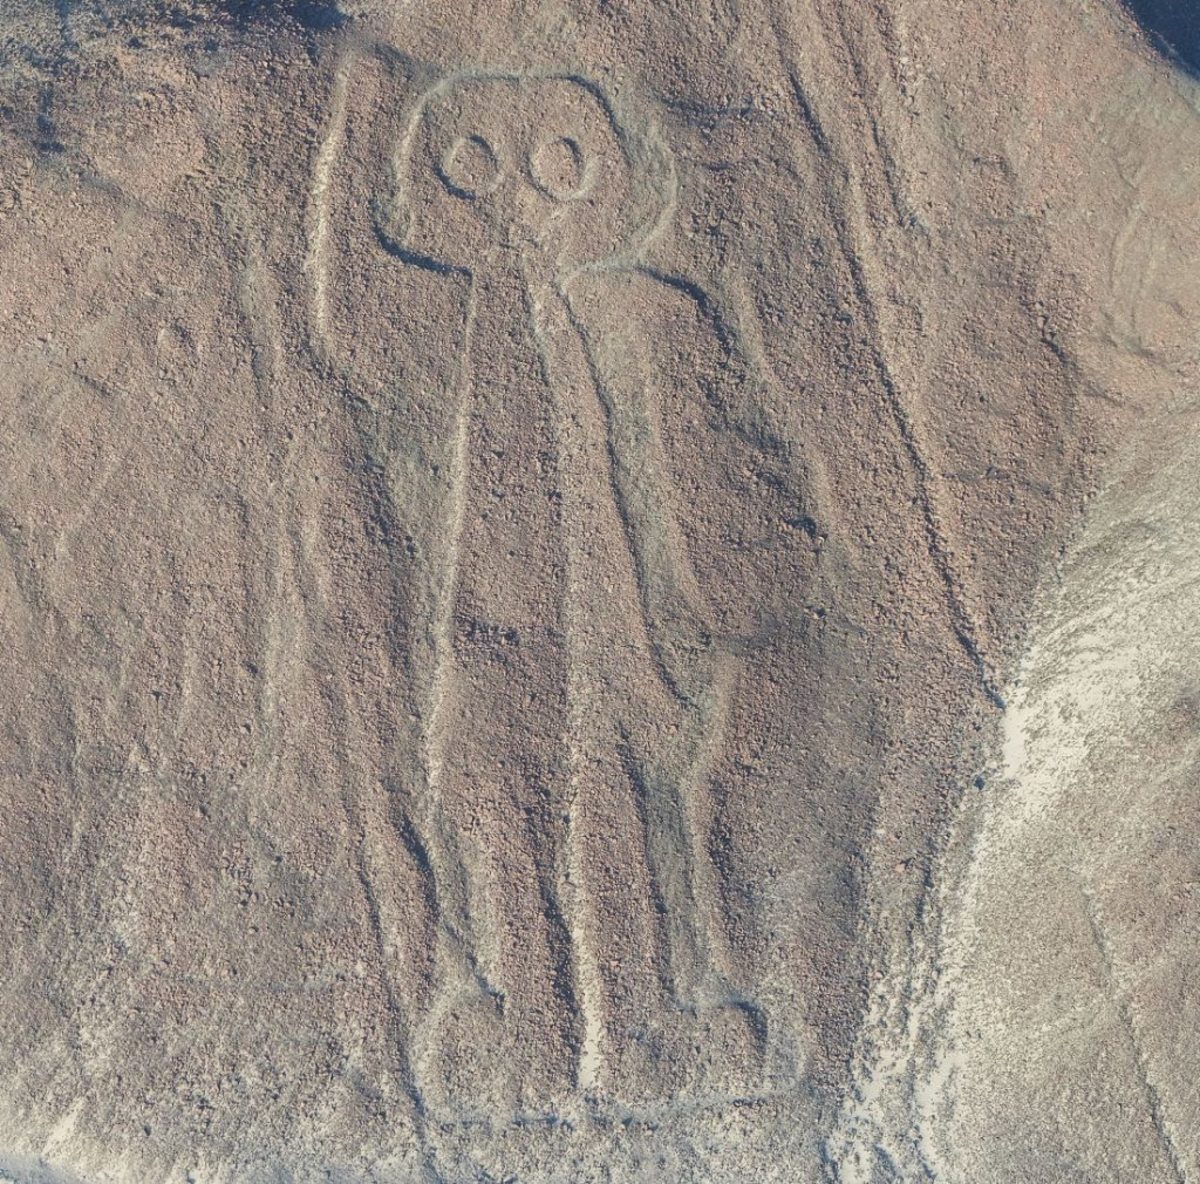 Geoglyph called The Astronaut